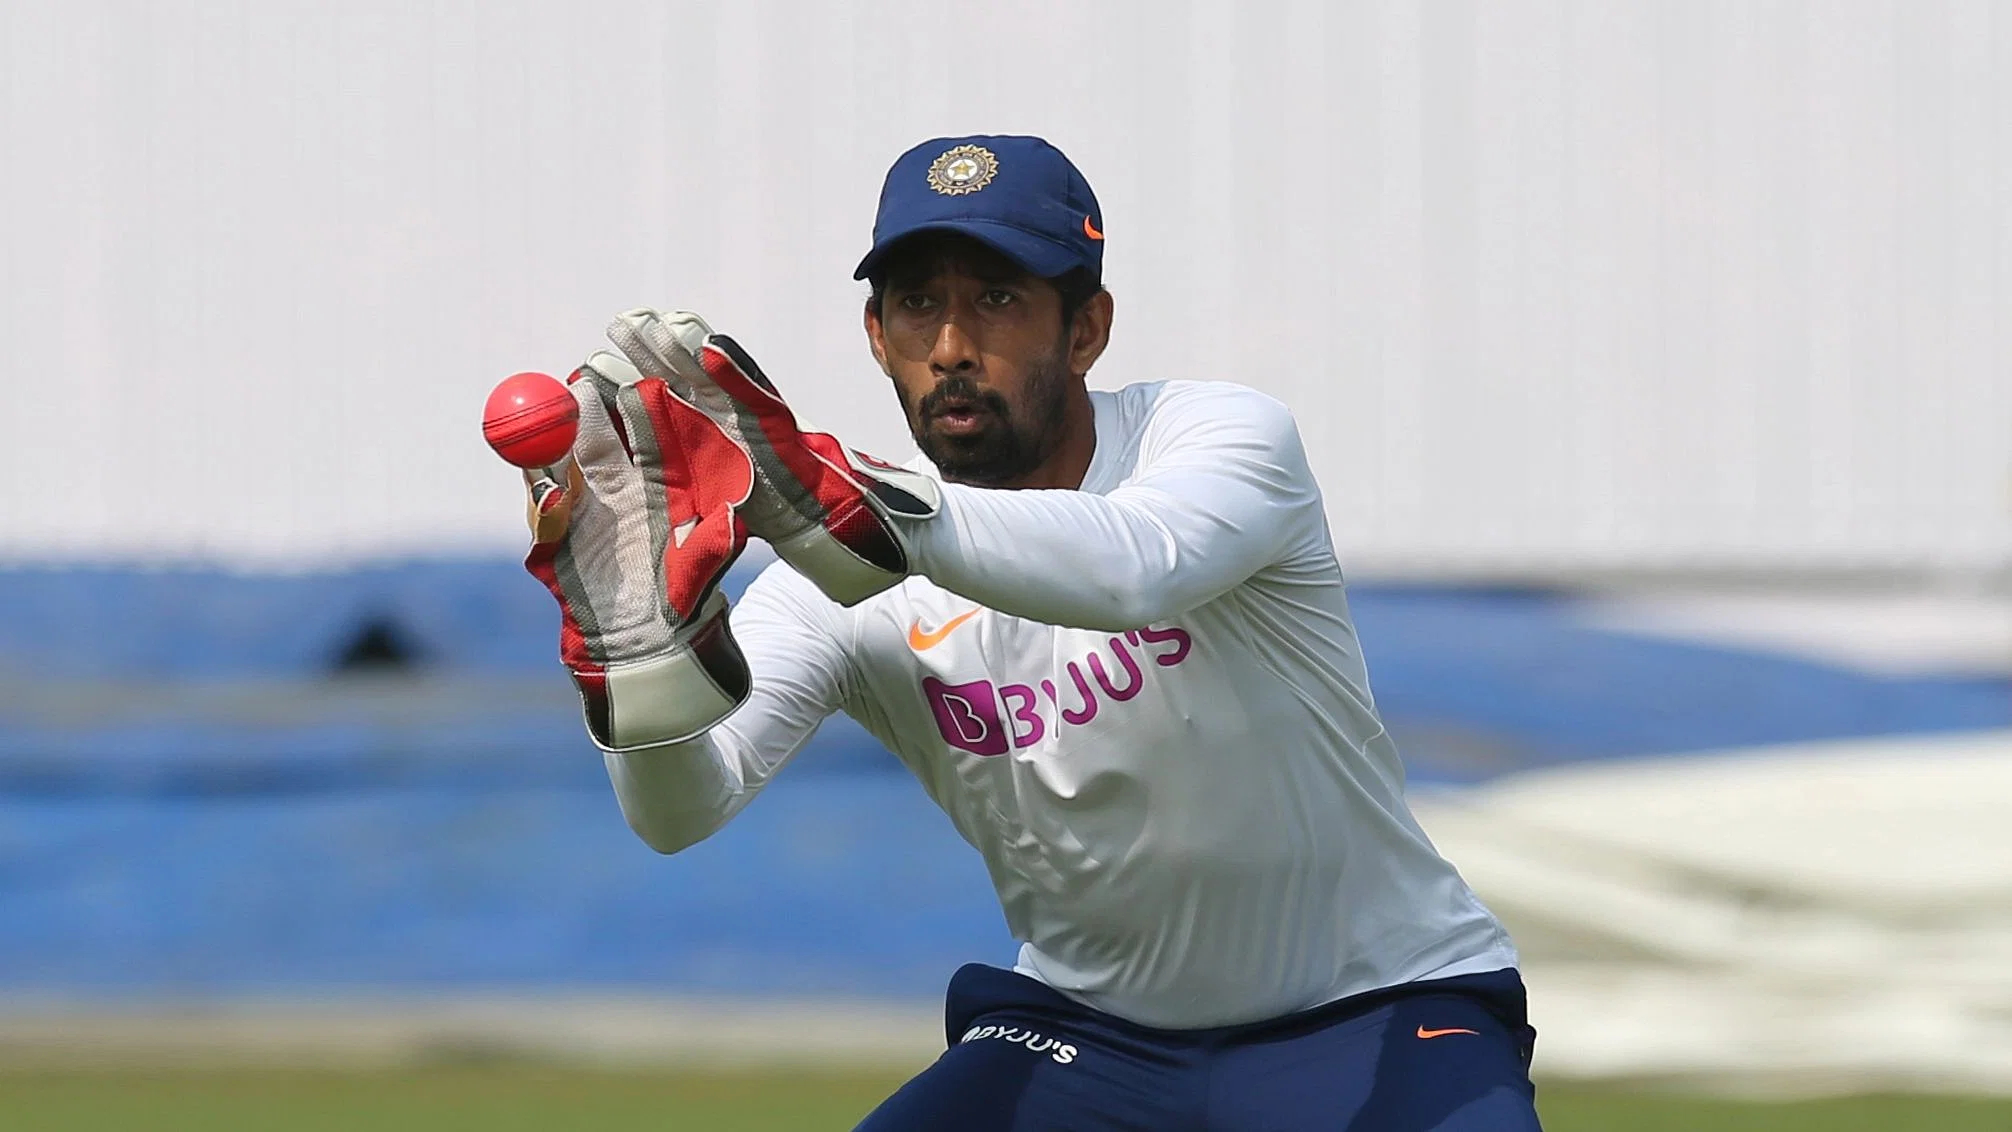 Wriddhiman Saha claimed BCCI president Sourav Ganguly assured him of his place in Indian team | Twitter